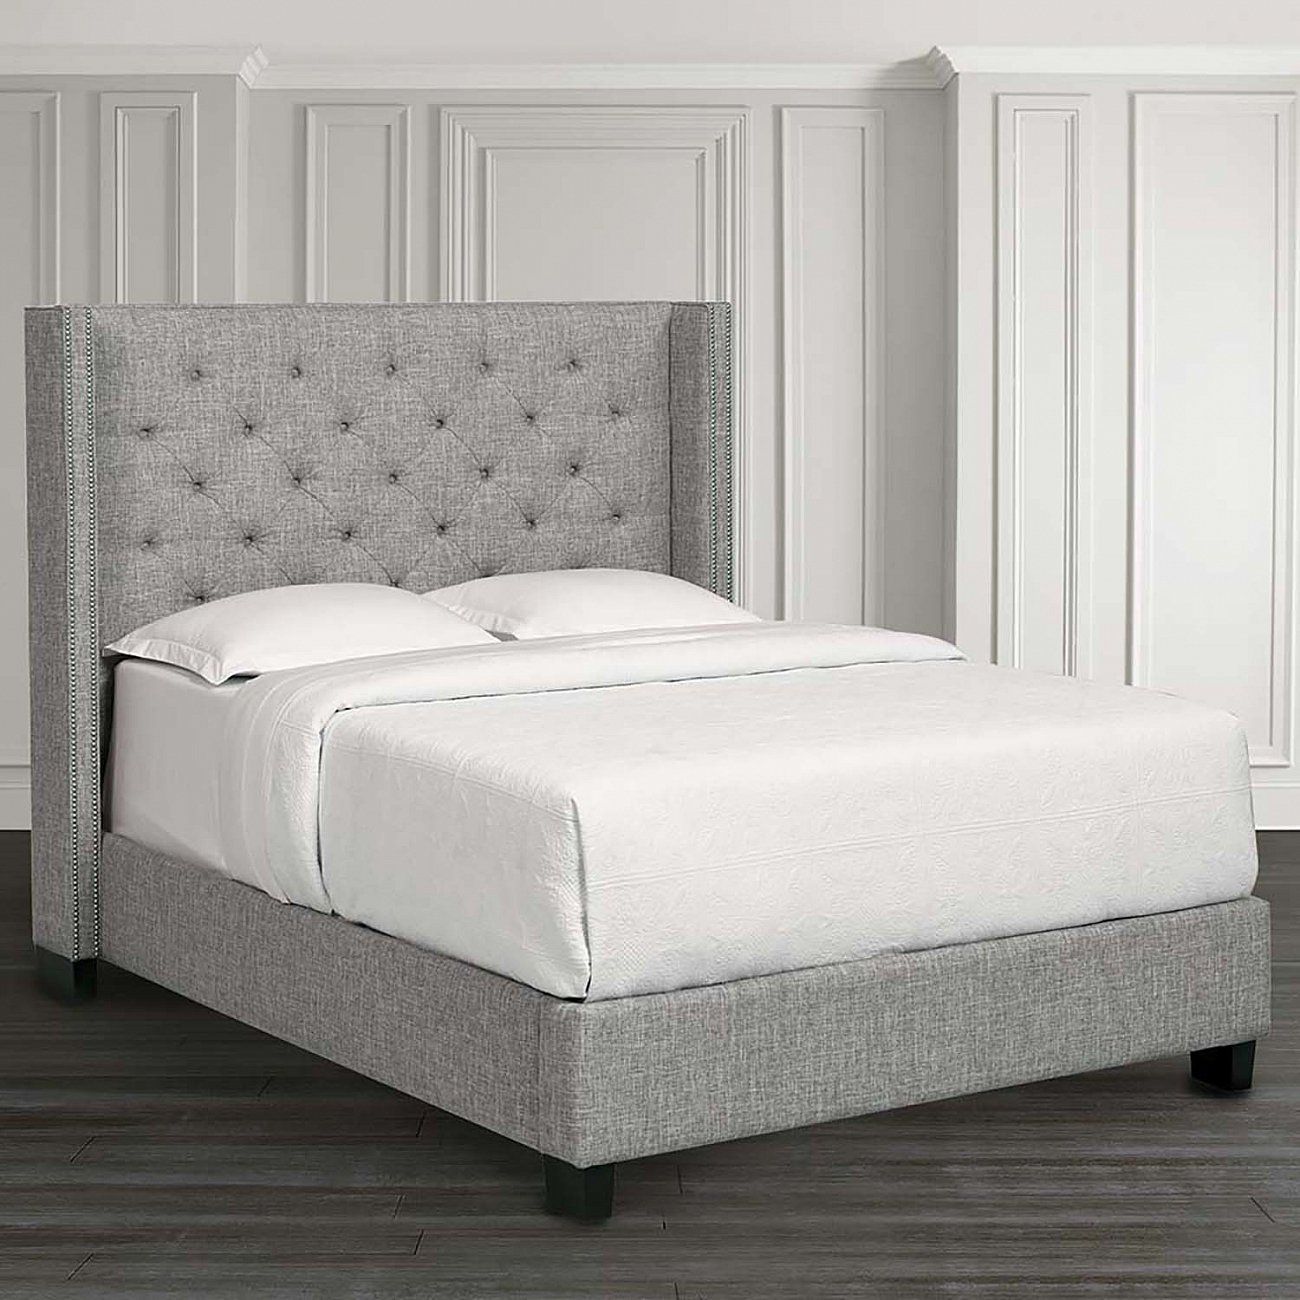 Teenage bed 140x200 cm gray-beige with carnations and carriage screed Wing